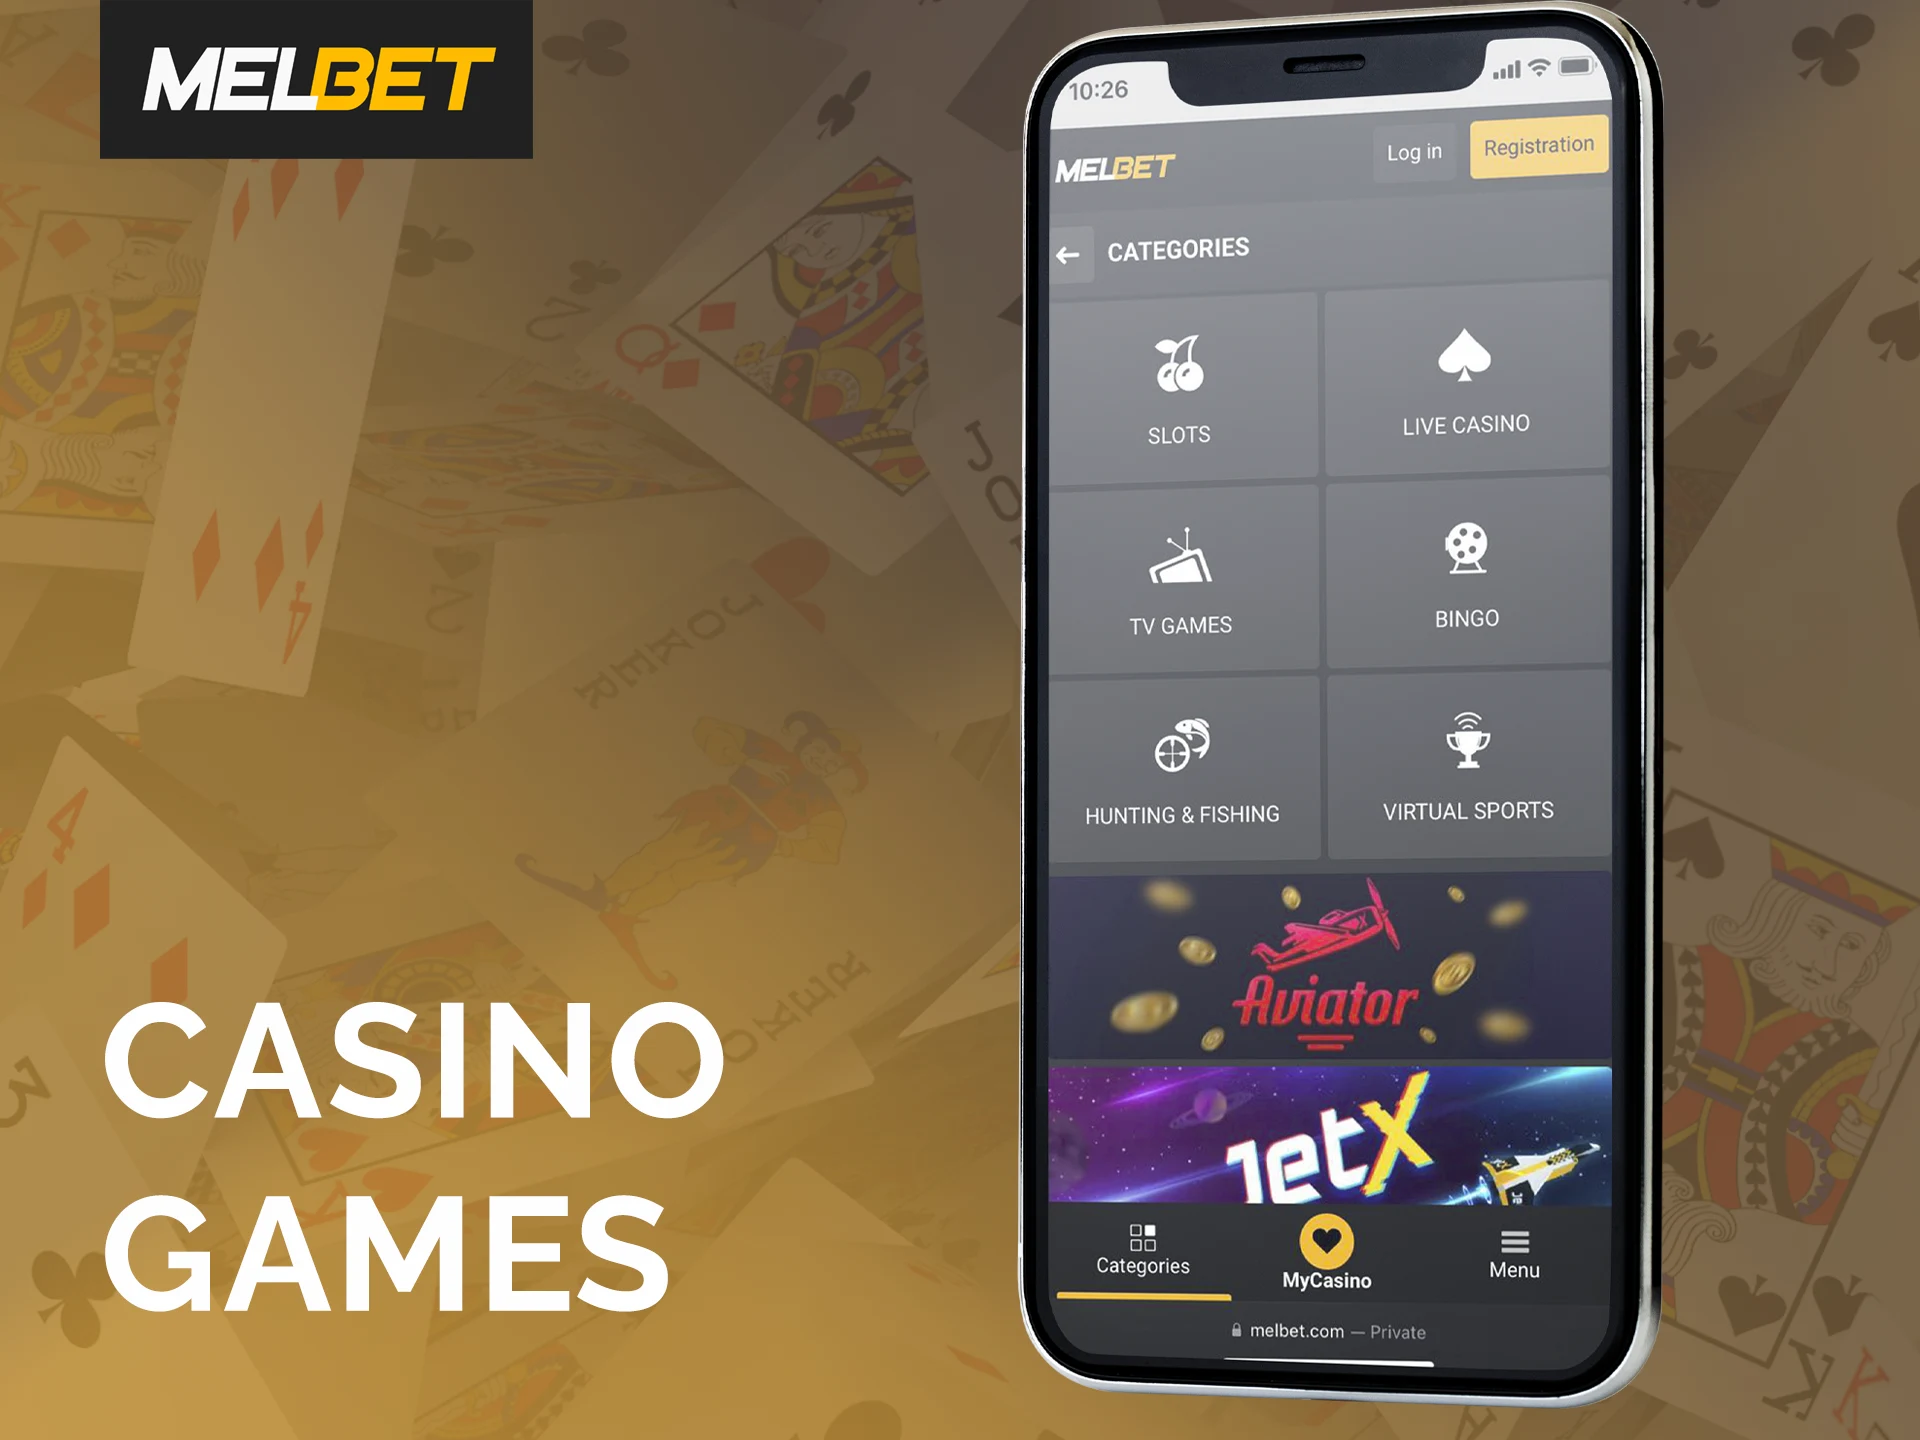 You will find your favorite categories of casino games in the app.